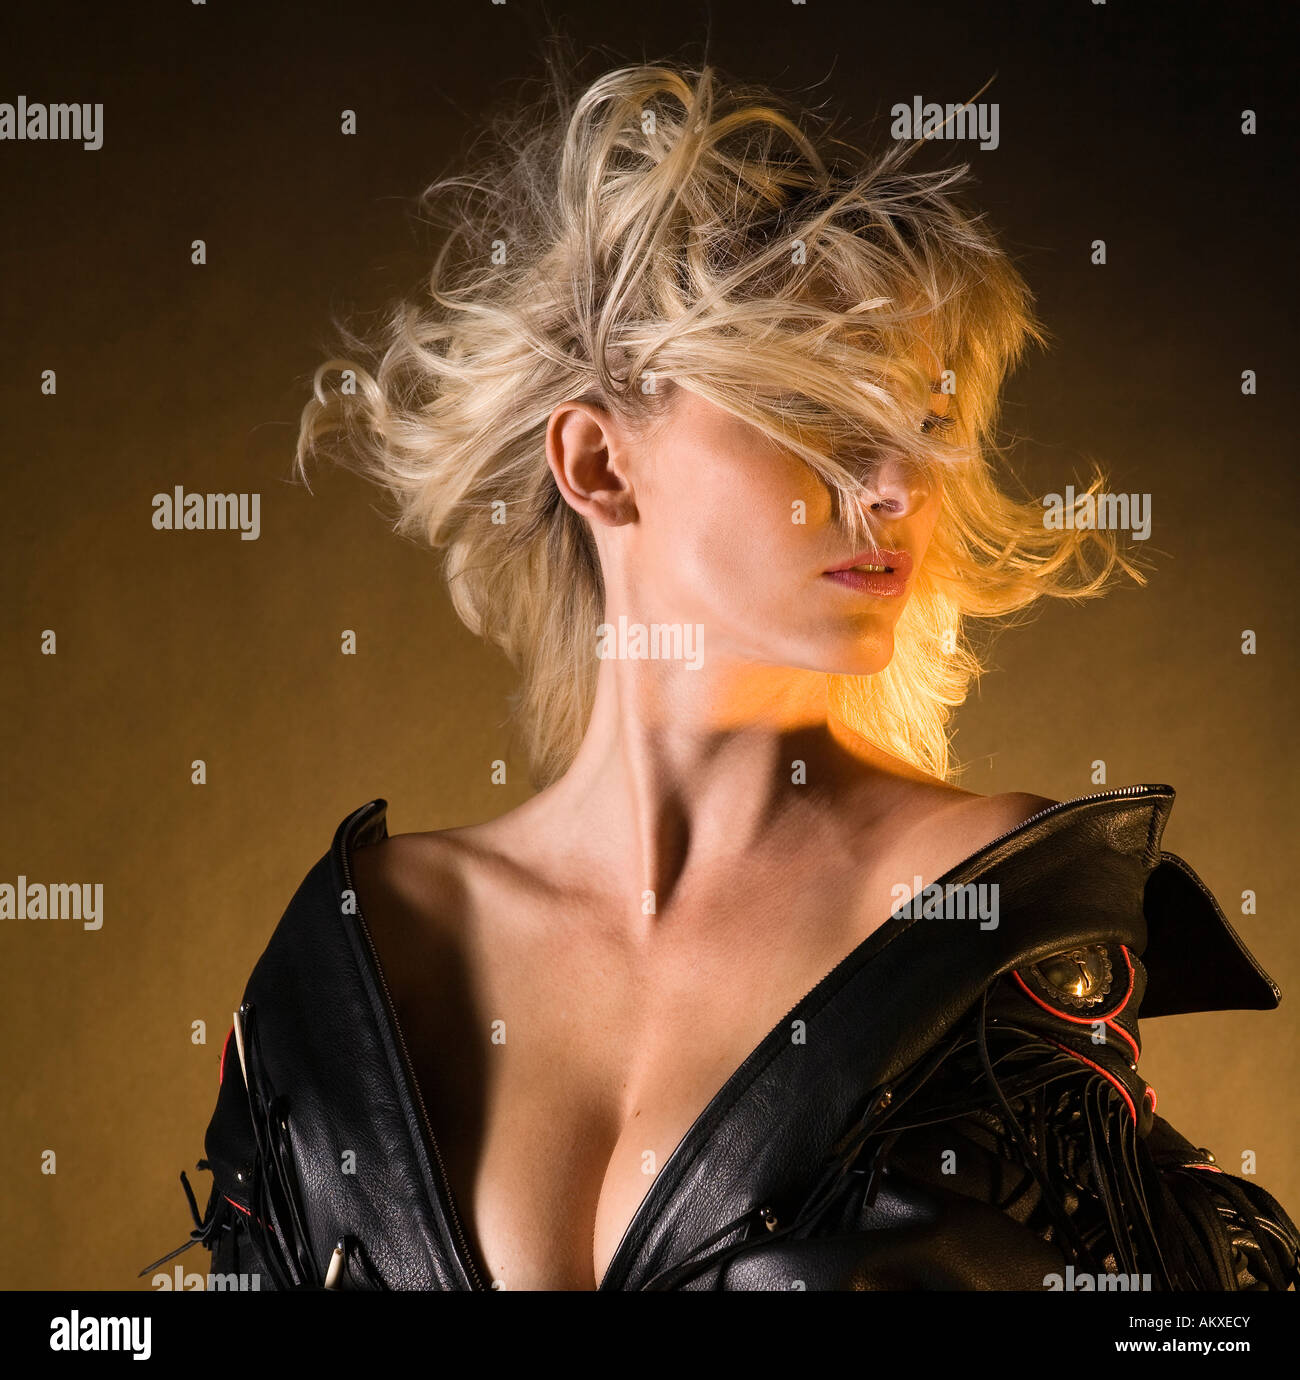 Portrait of a young blond Girl with leather jacket Stock Photo